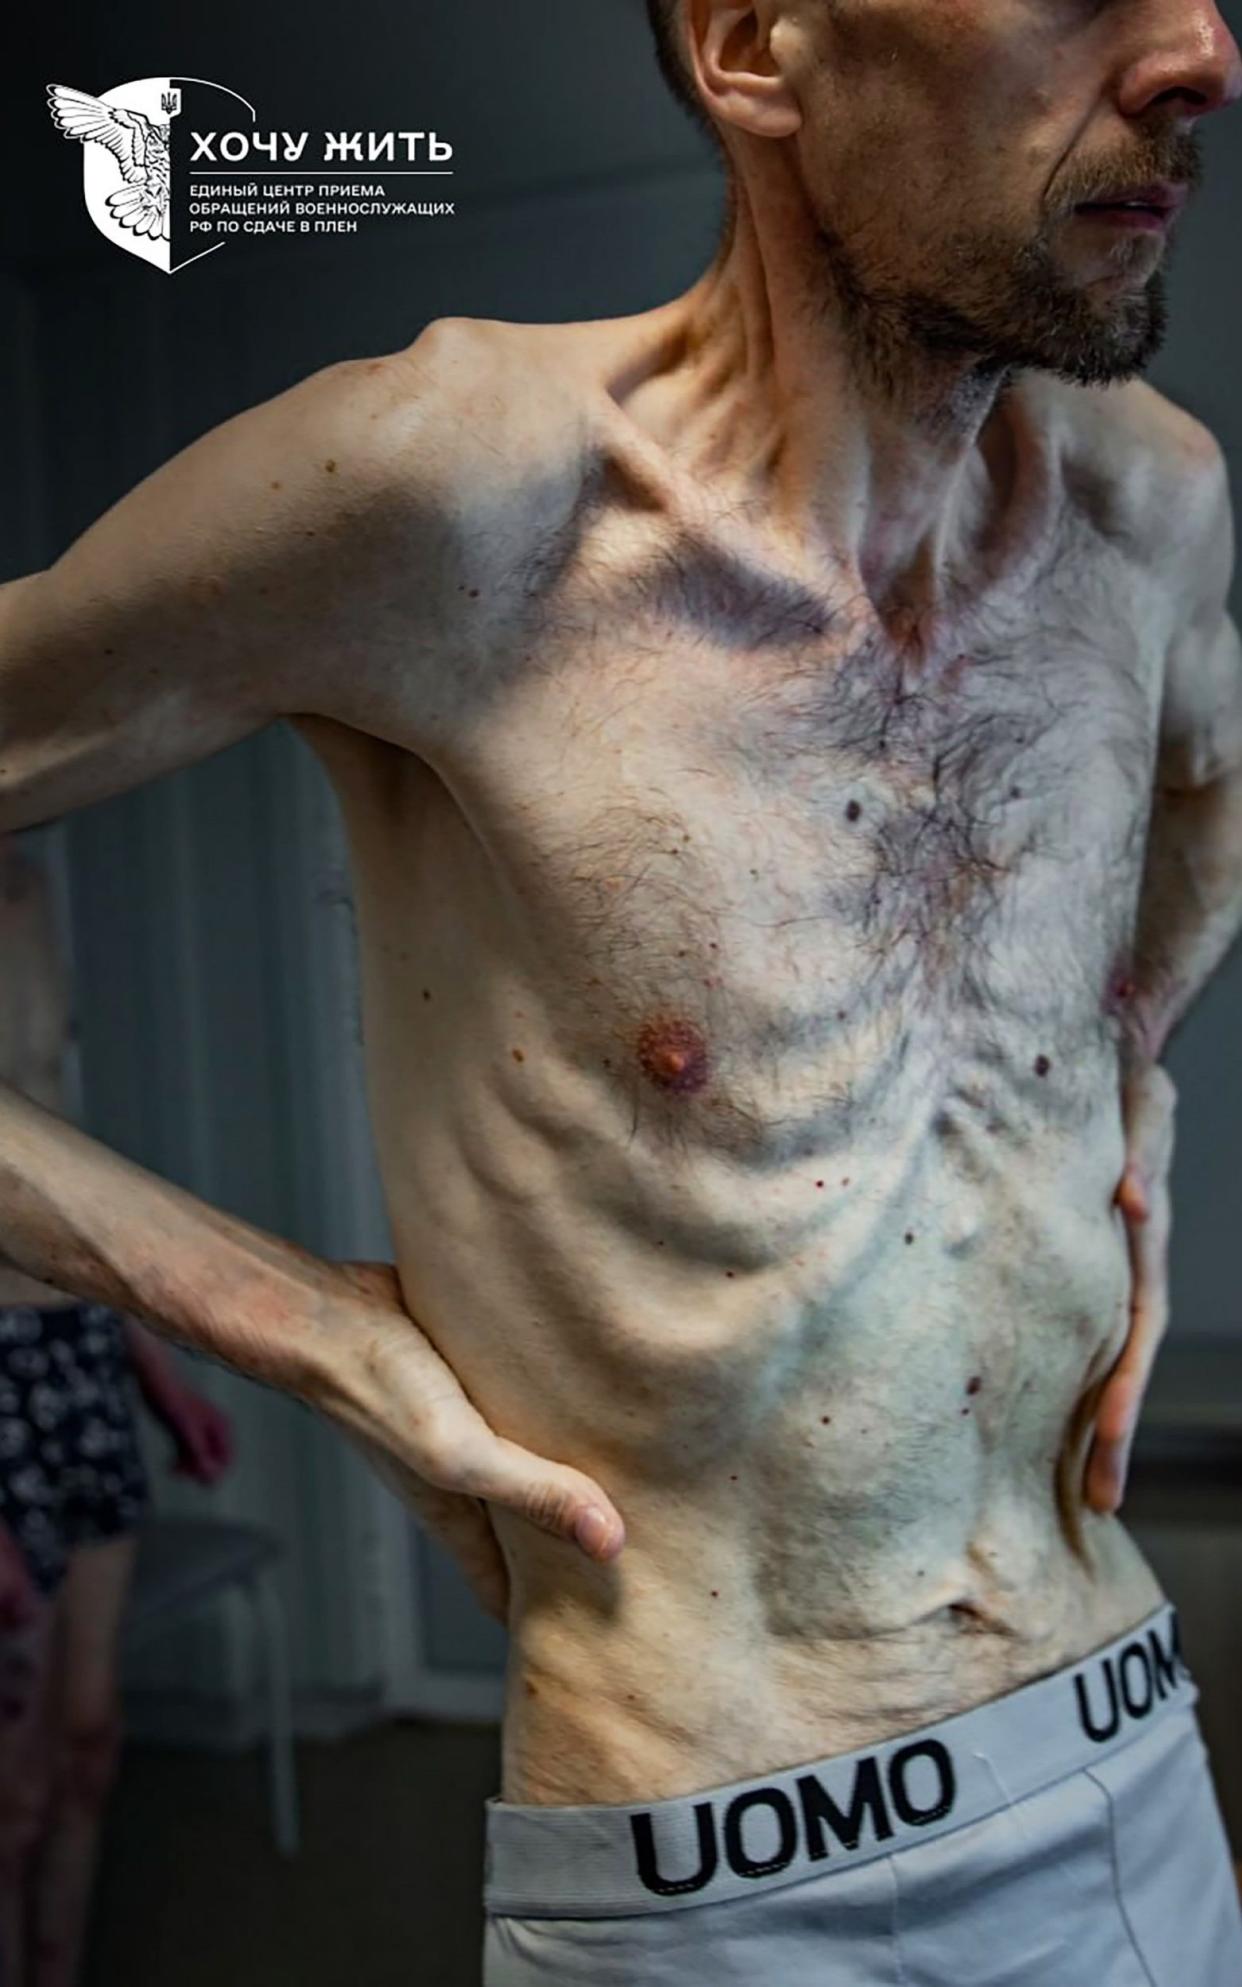 Mr Gorilyk's skin clings to his sunken stomach and ribs as he stands